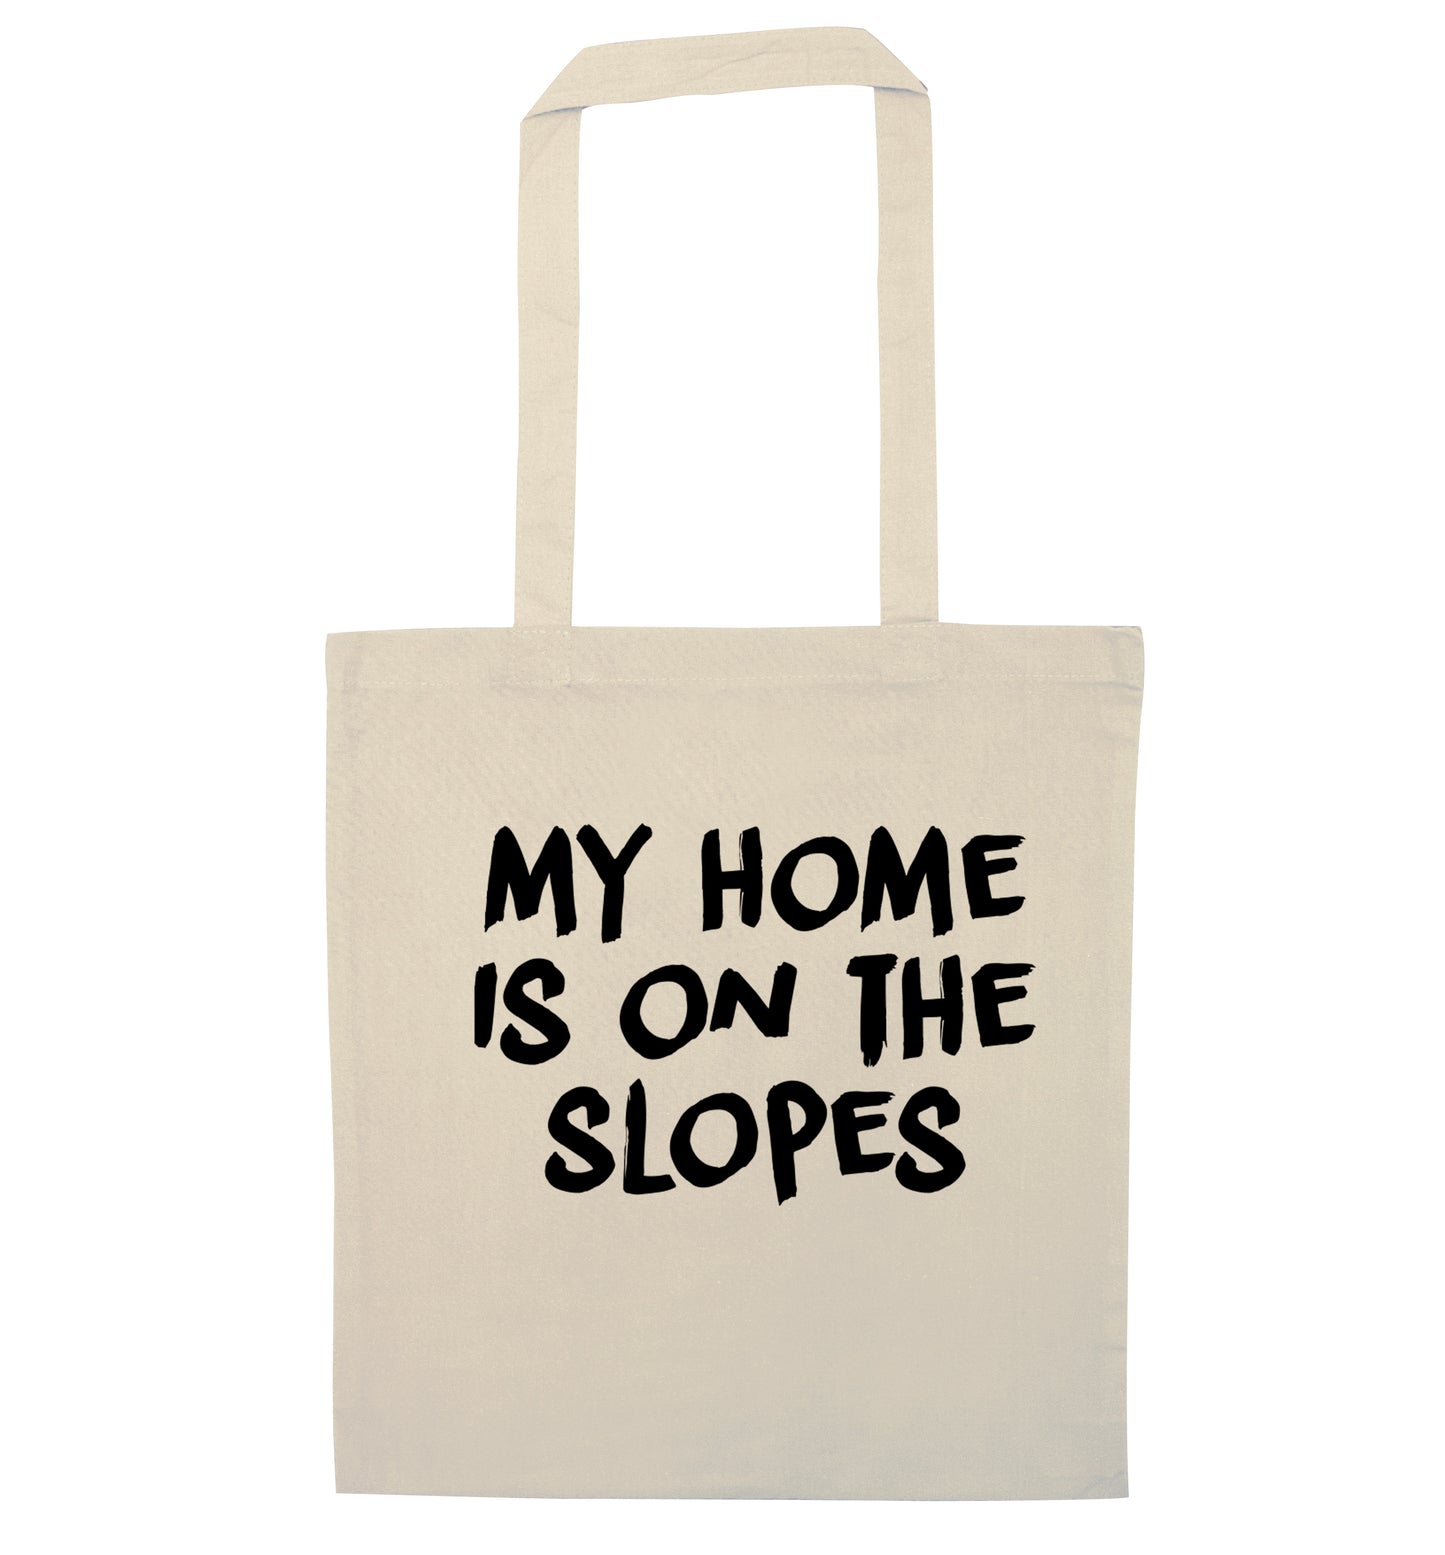 My home is on the slopes natural tote bag